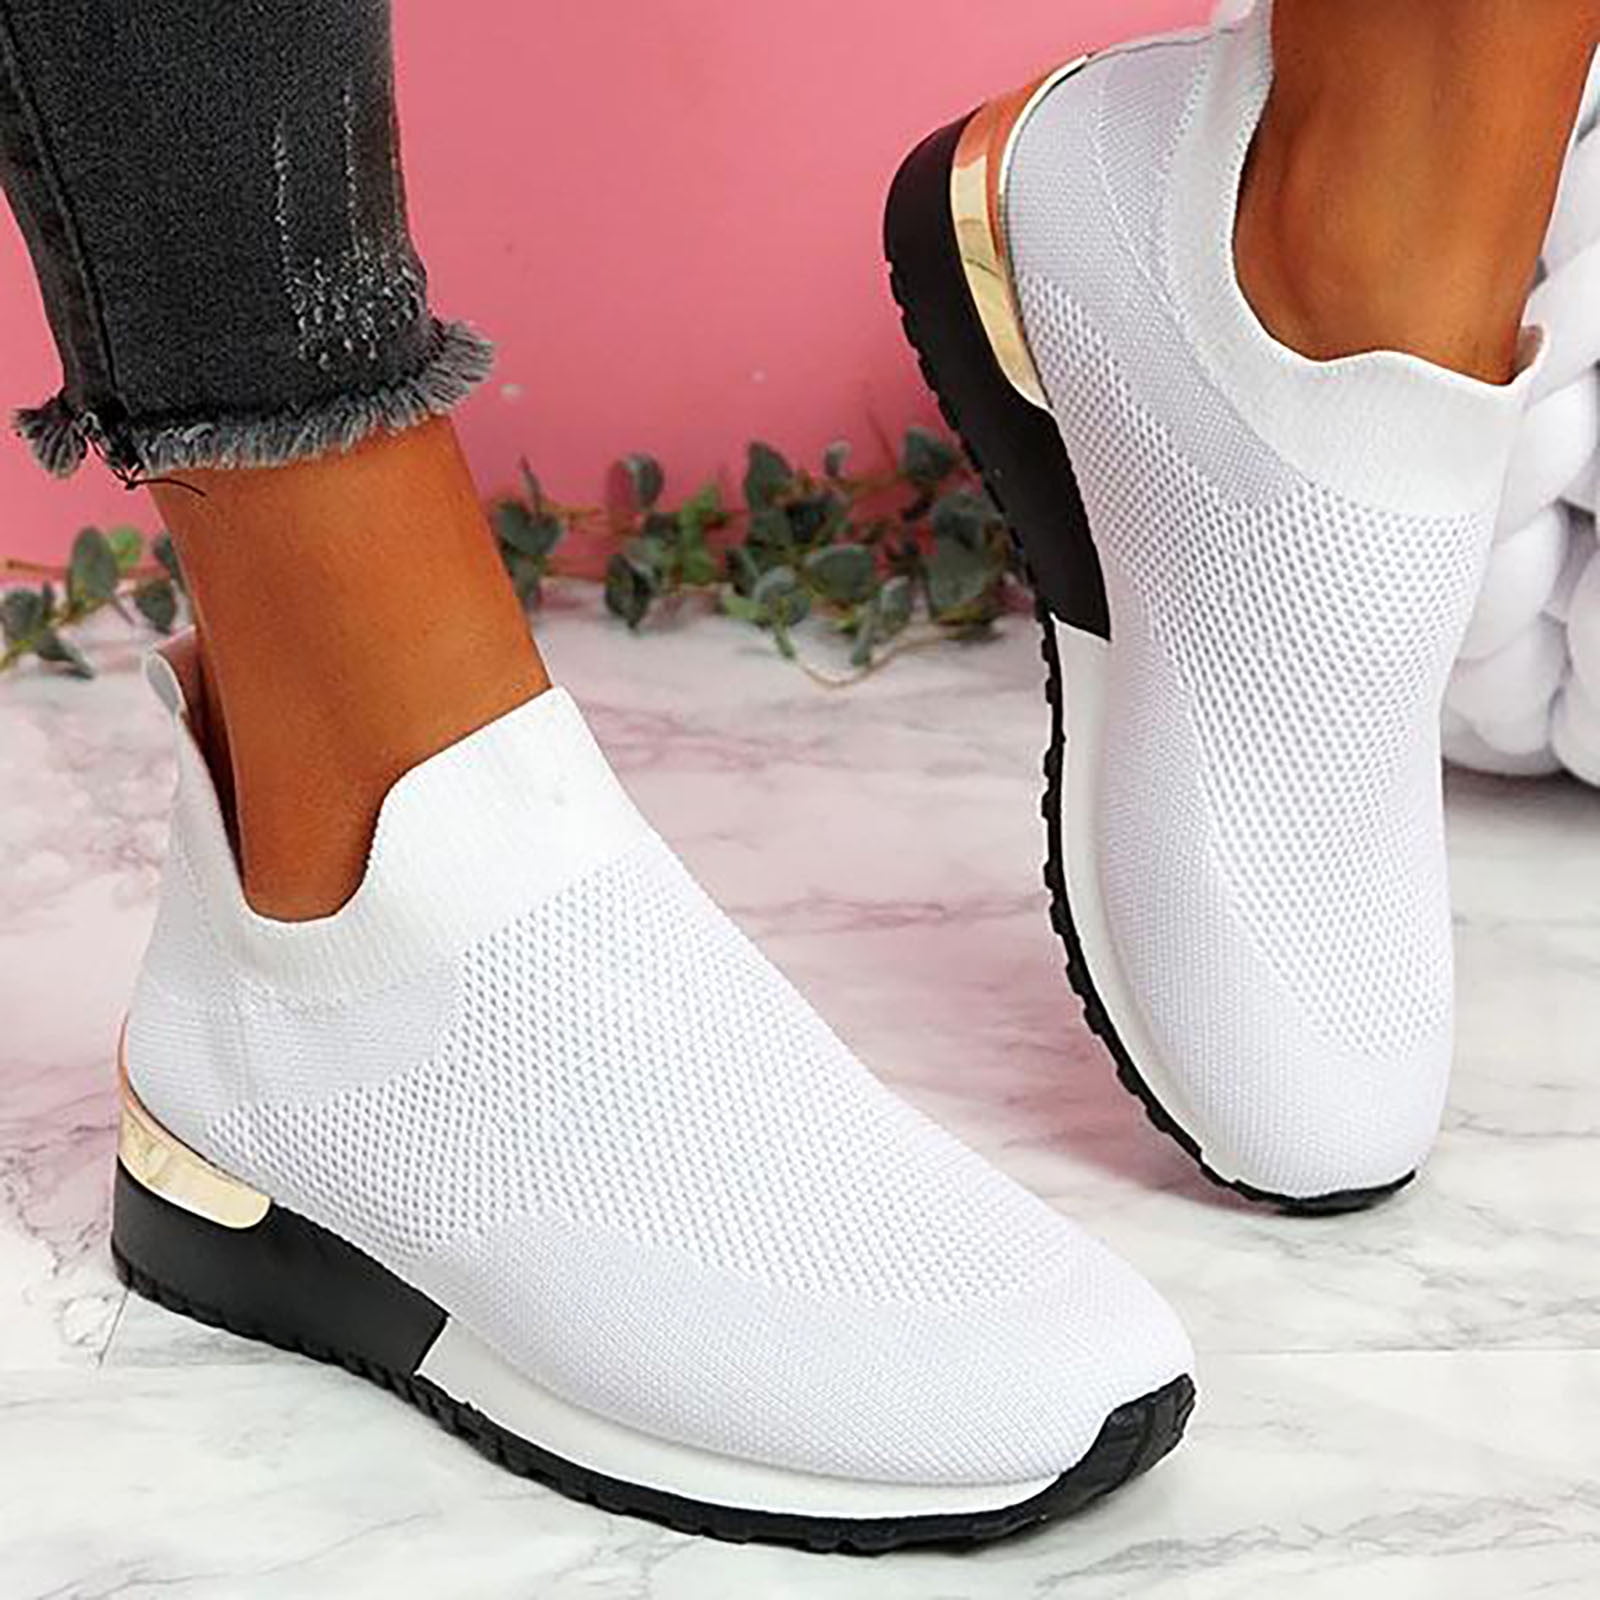 Winter Savings Clearance! SuoKom Sneakers for Women, Plus Size Casual ...